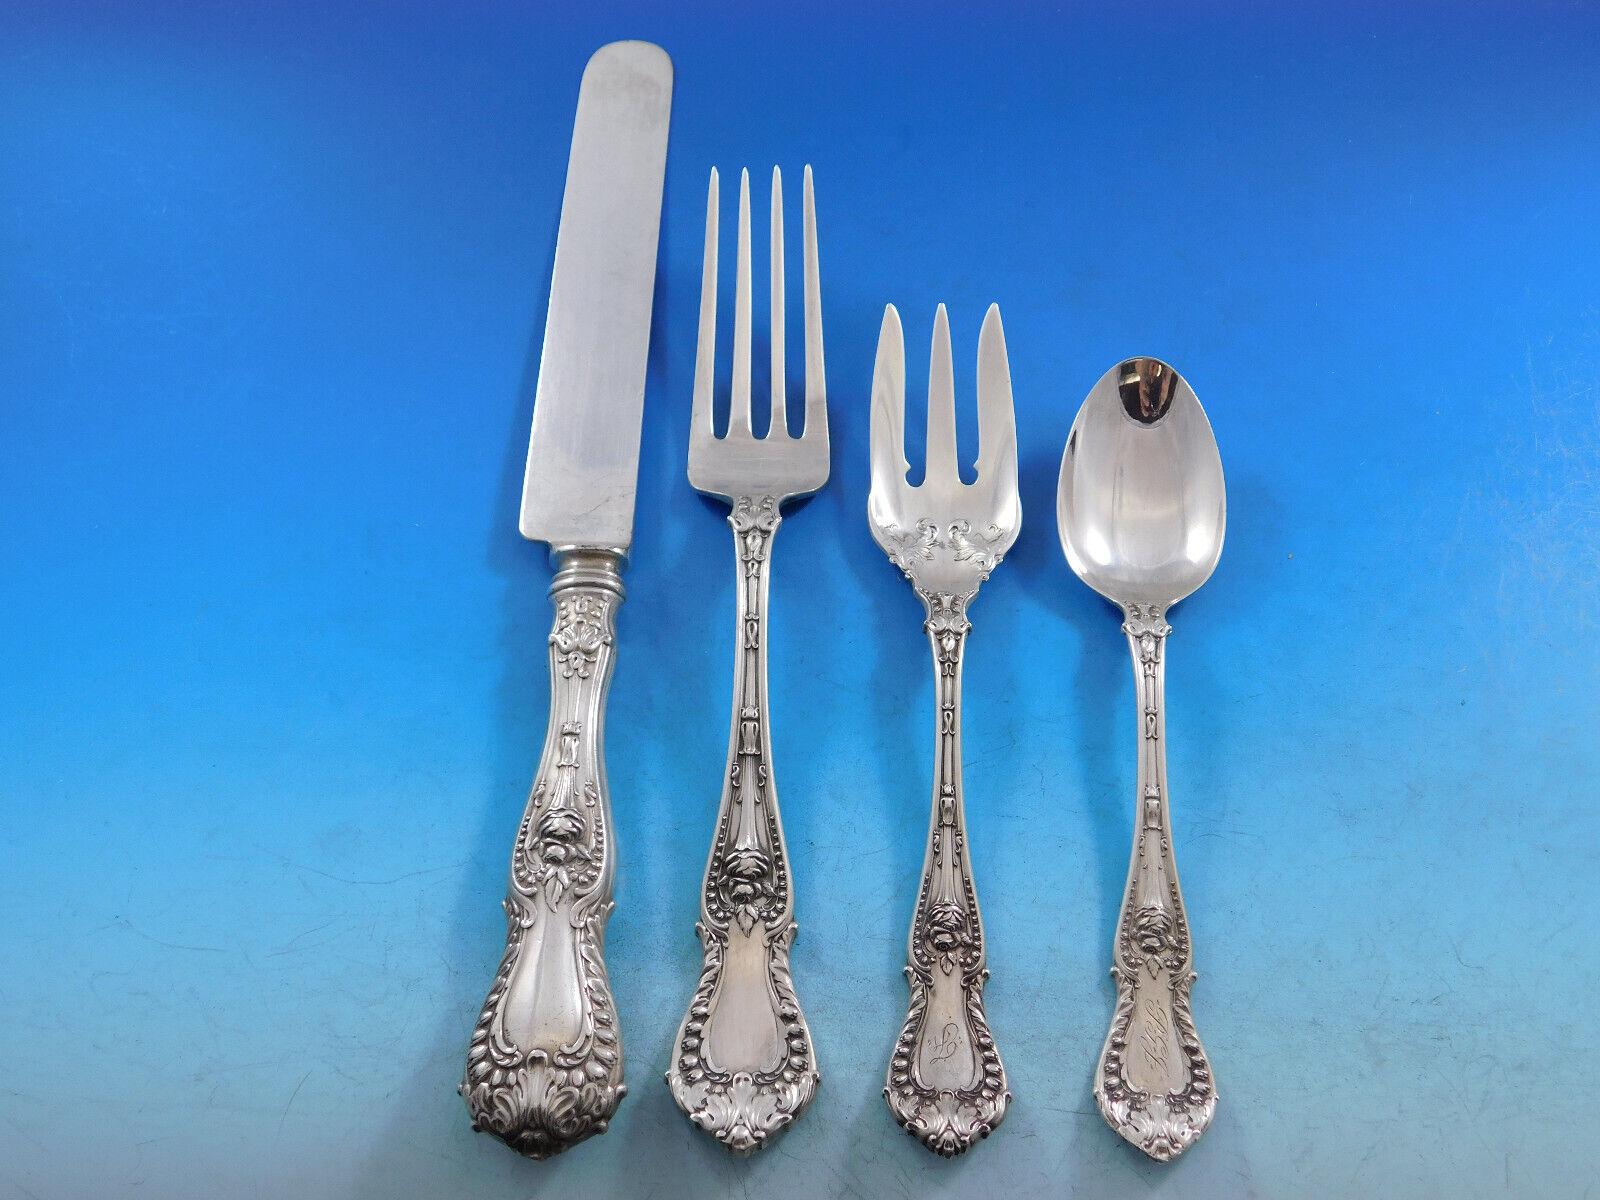 Dinner size Dorothy Vernon by Whiting Sterling silver Flatware set, 73 pieces. This set includes:

12 Dinner Size Knives with blunt plated blades, 9 1/2